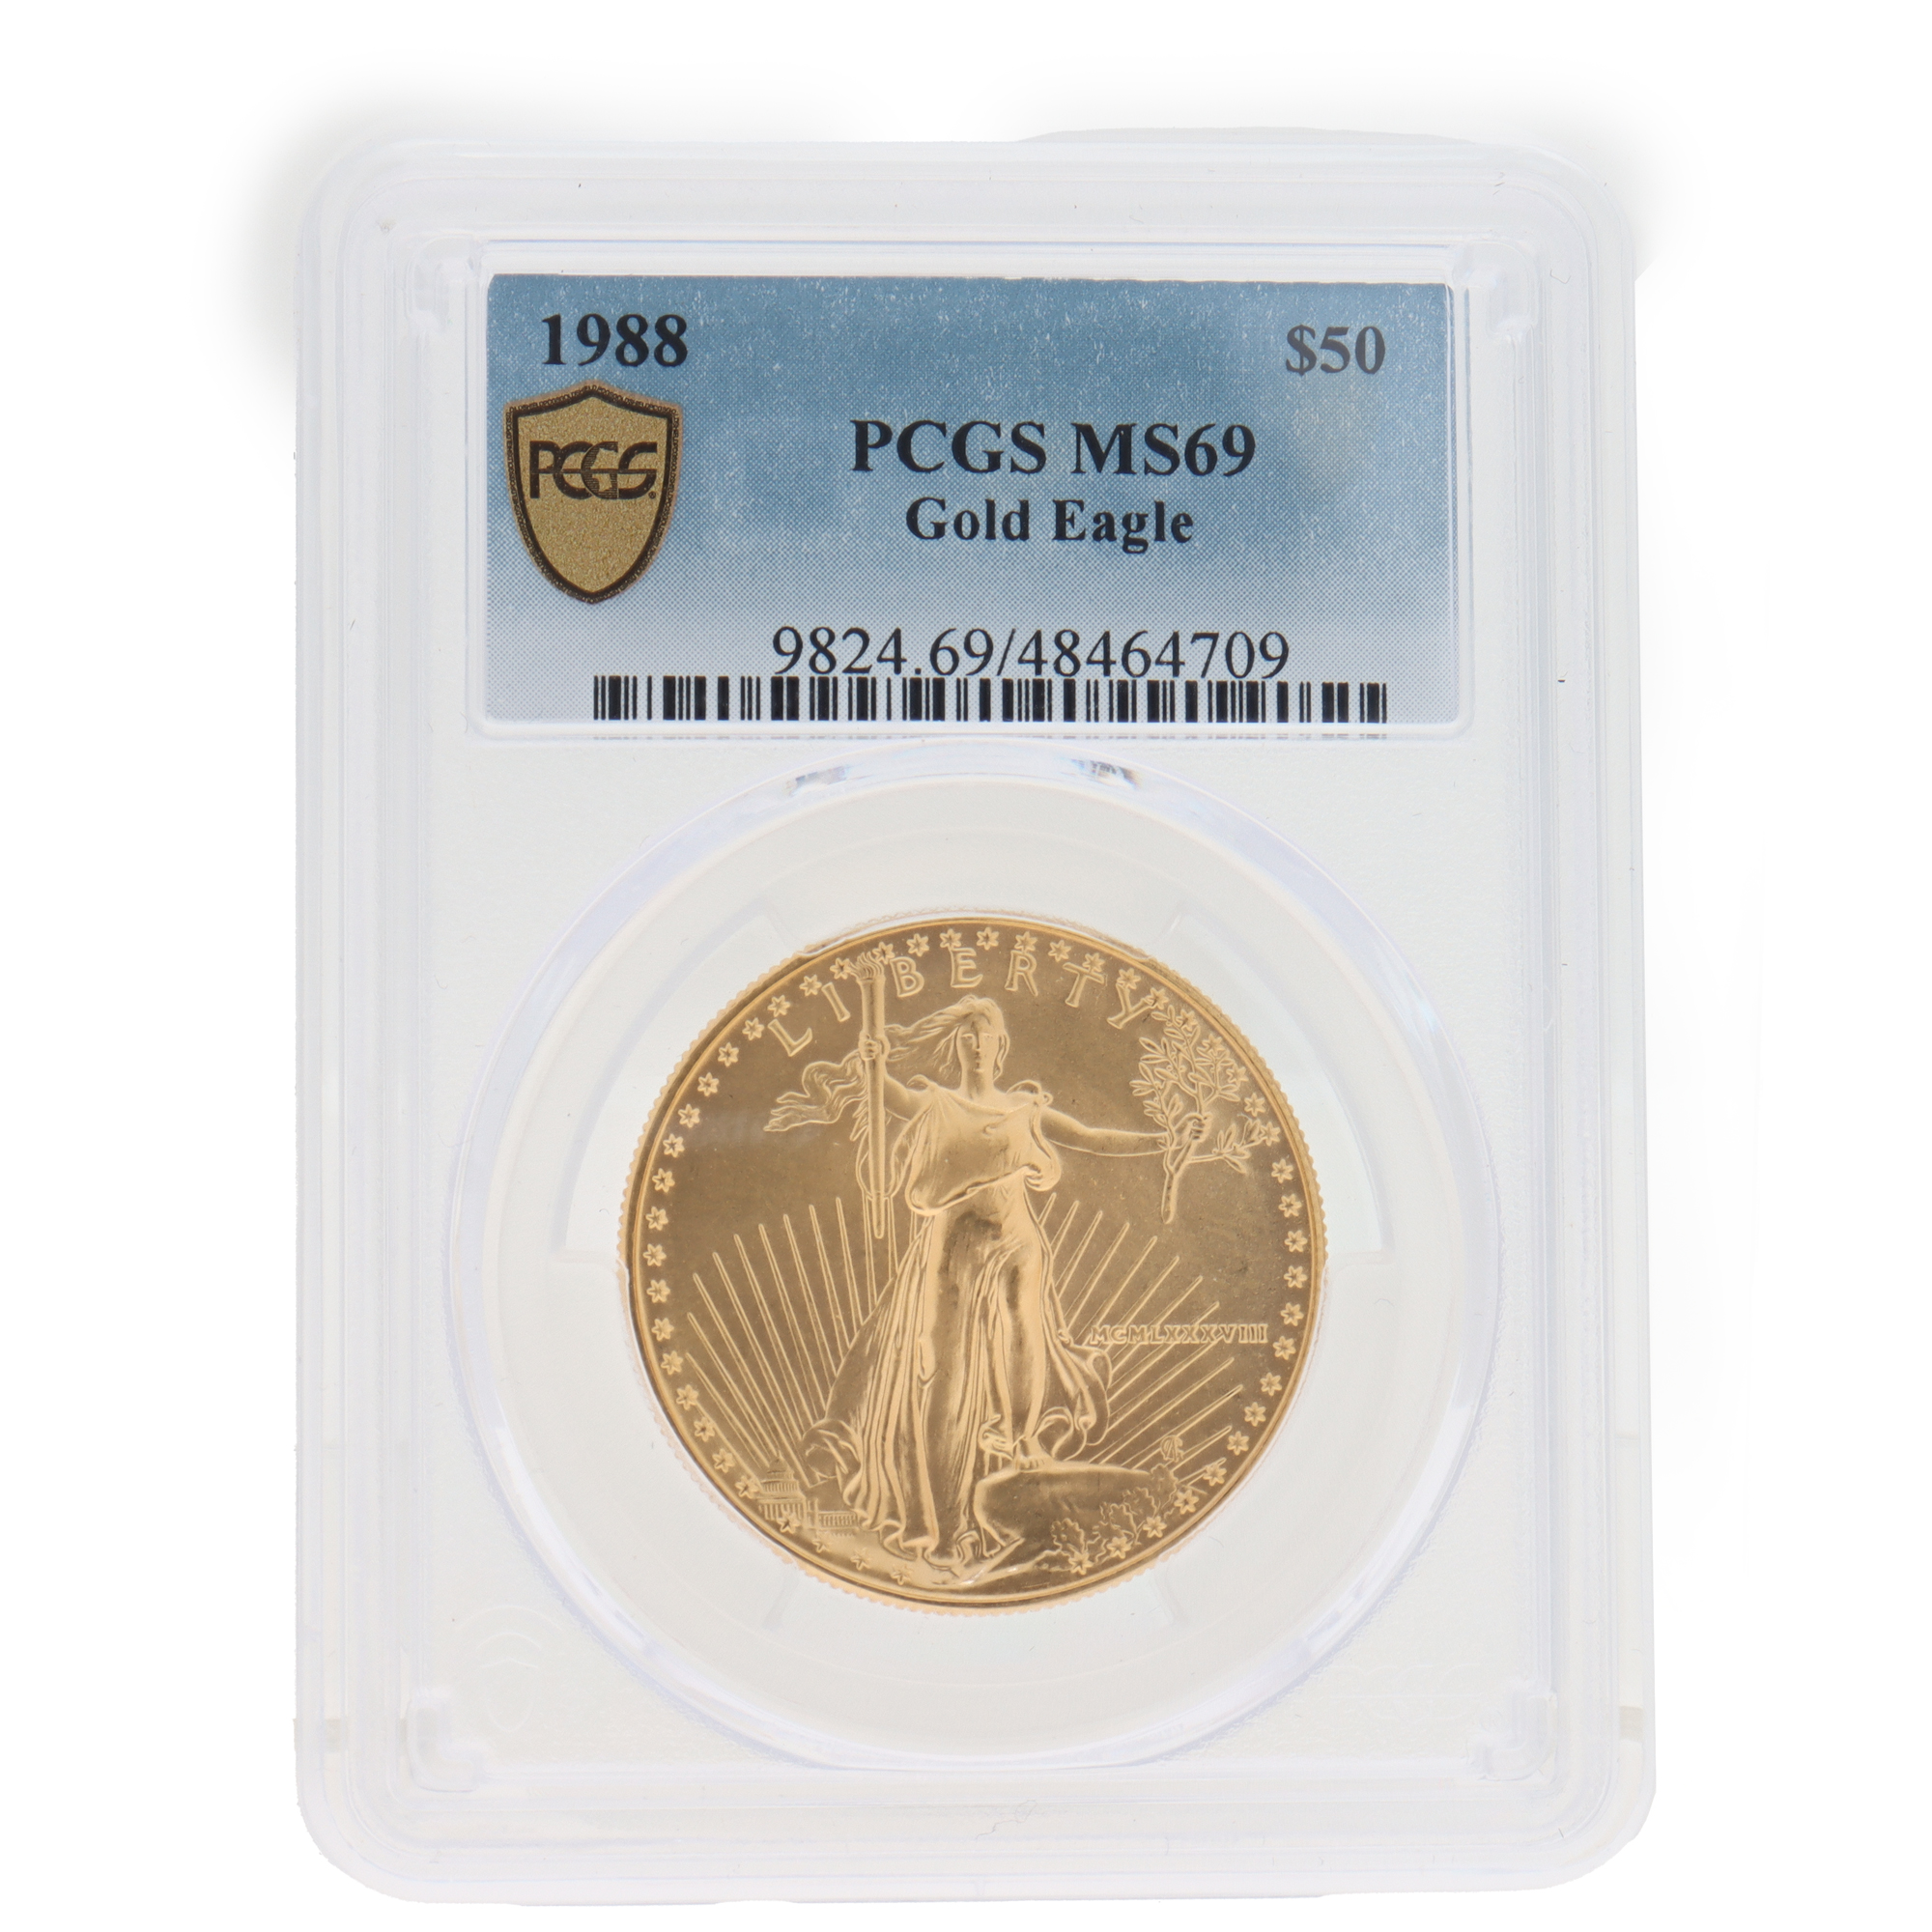 $50 Gold American Eagle Coin from 1988. Uncirculated PCGS grading of MS69 (Default)